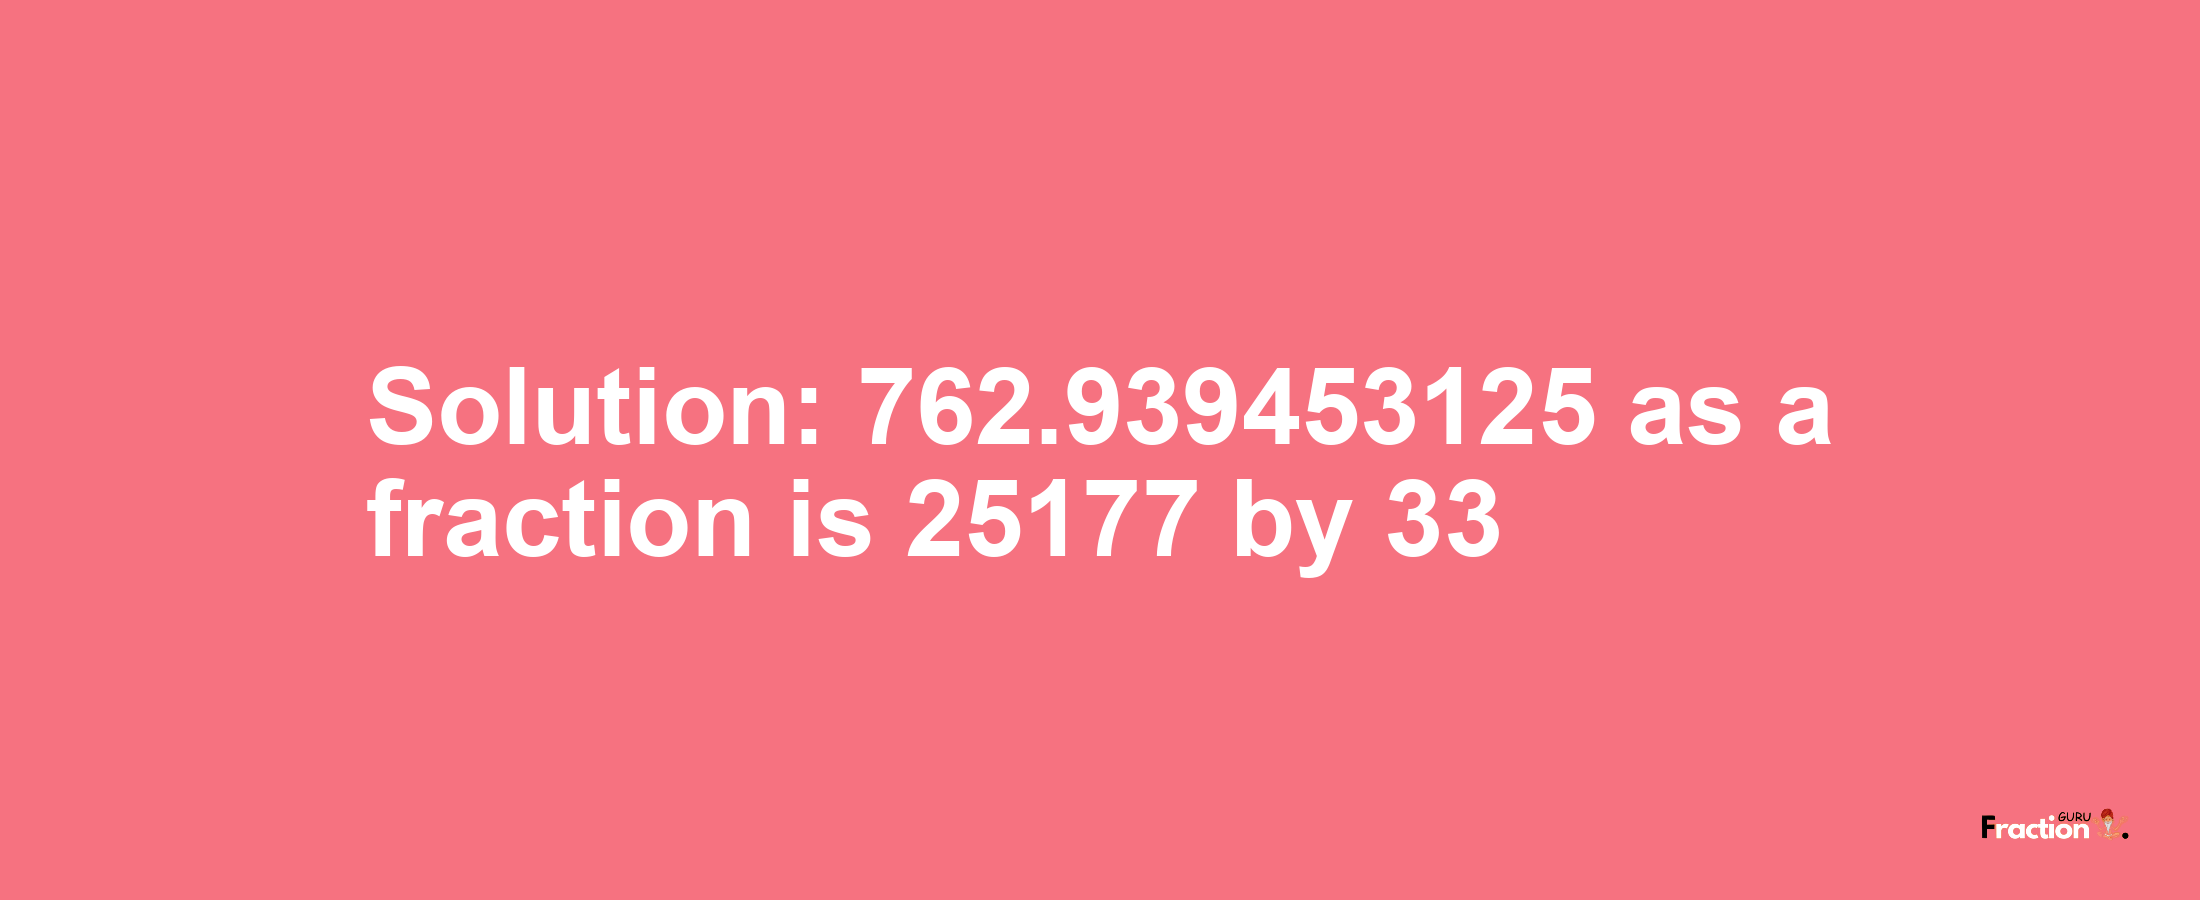 Solution:762.939453125 as a fraction is 25177/33